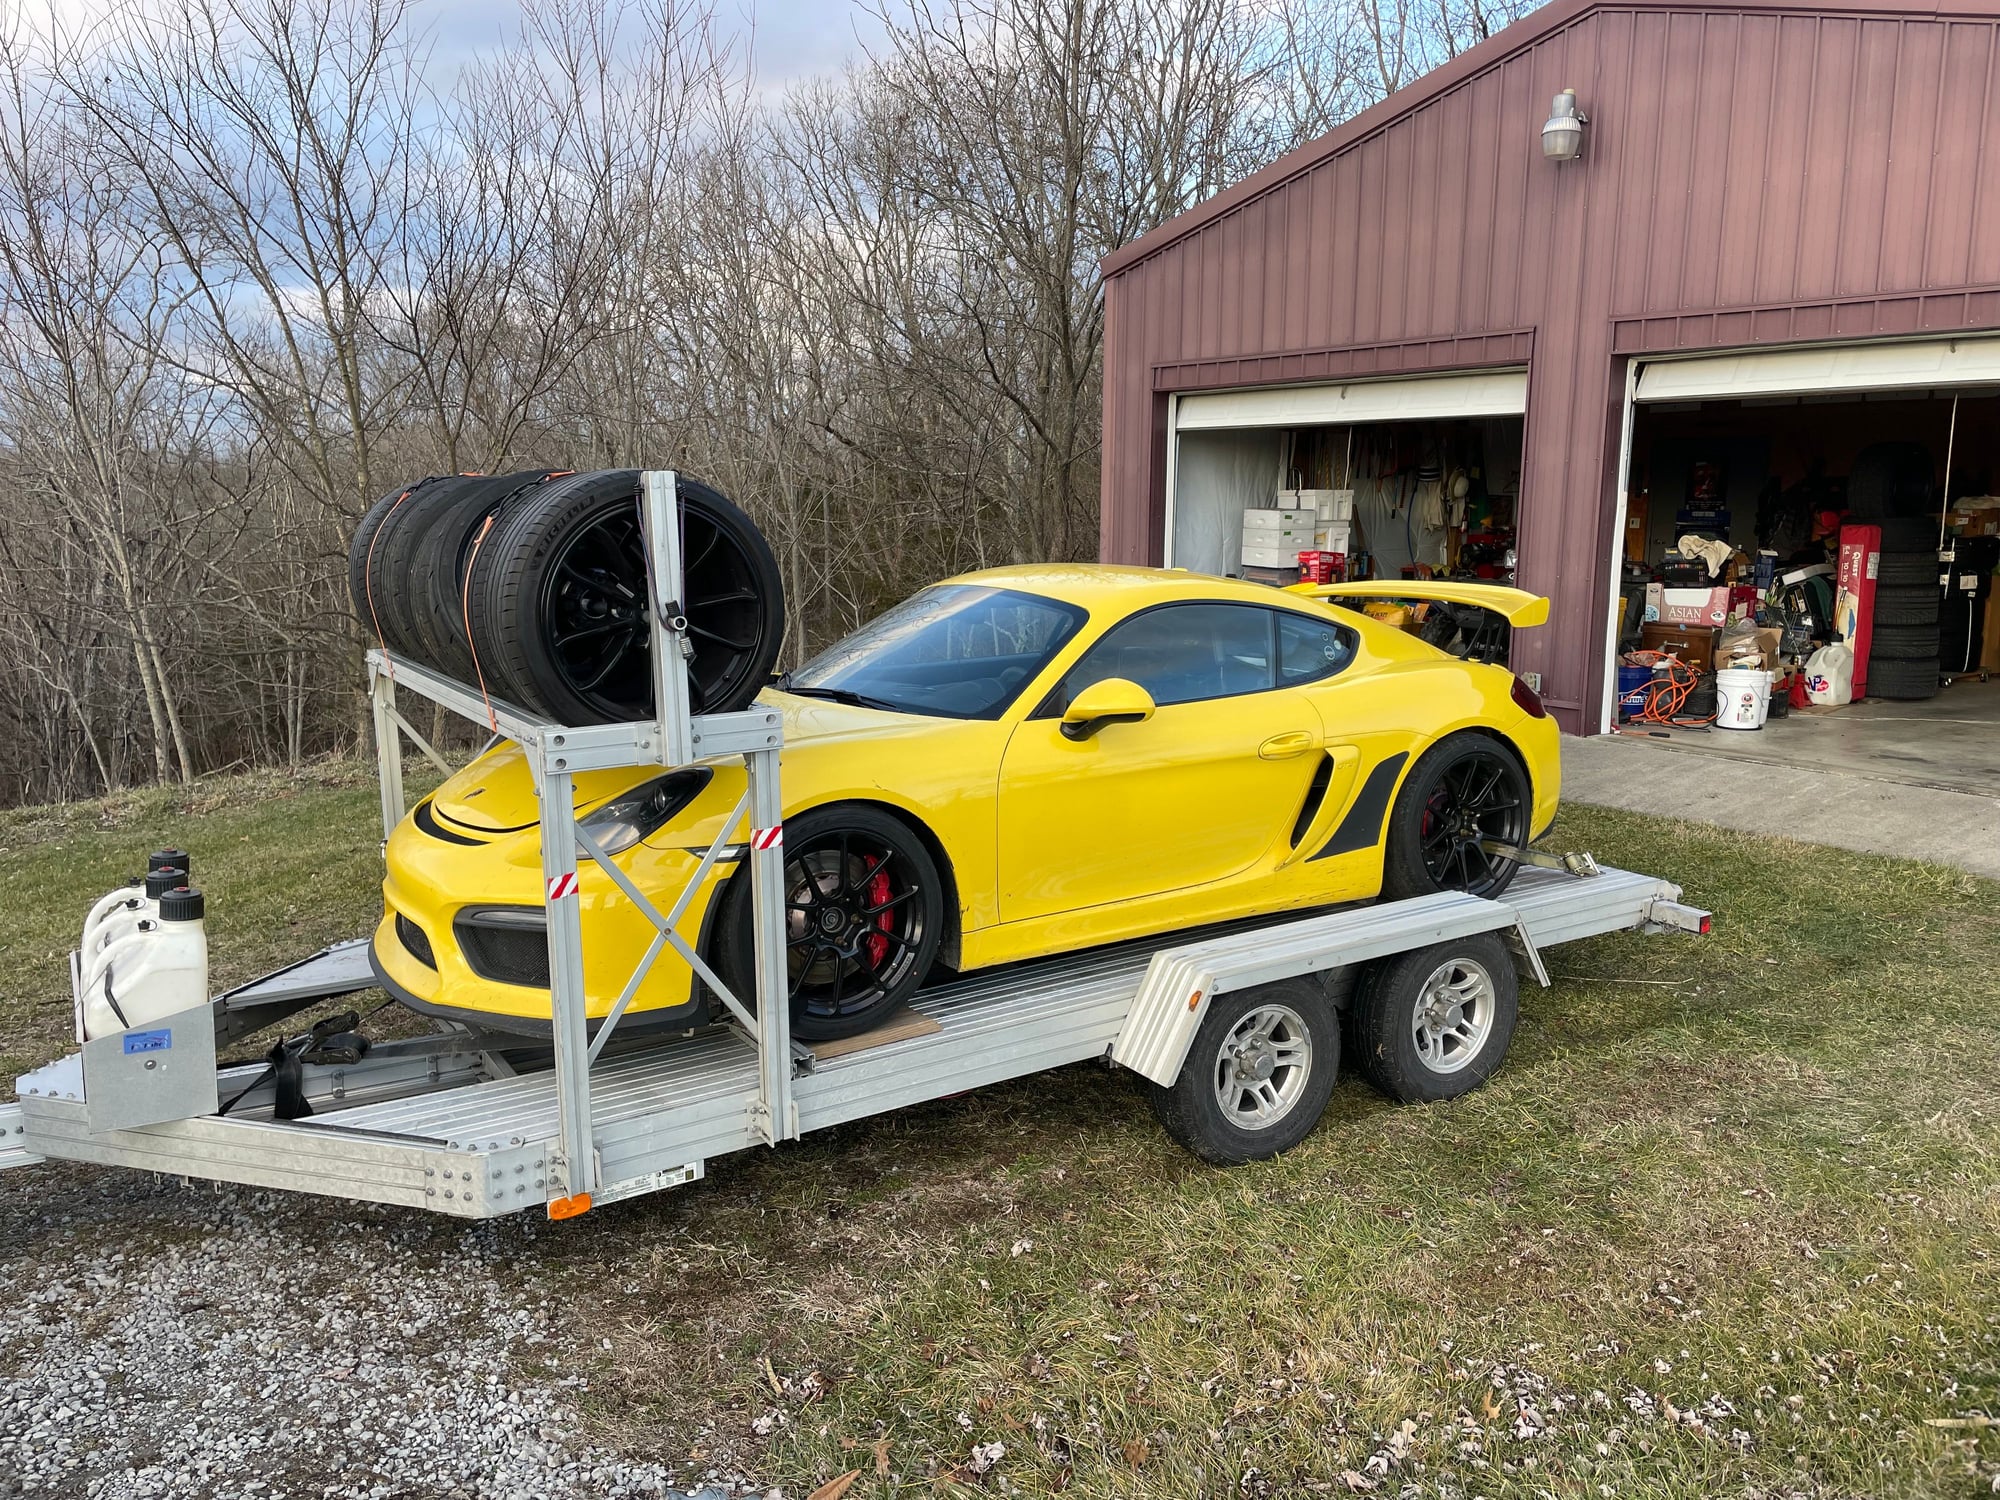 2016 Porsche Cayman GT4 - Don’t bring a trailer! 981 GT4 in Racing Yellow & 2016 Trailex CT-8405 trailer - Used - VIN WP0AC2A85GK191439 - 38,140 Miles - 6 cyl - 2WD - Manual - Coupe - Yellow - Louisville, KY 40205, United States